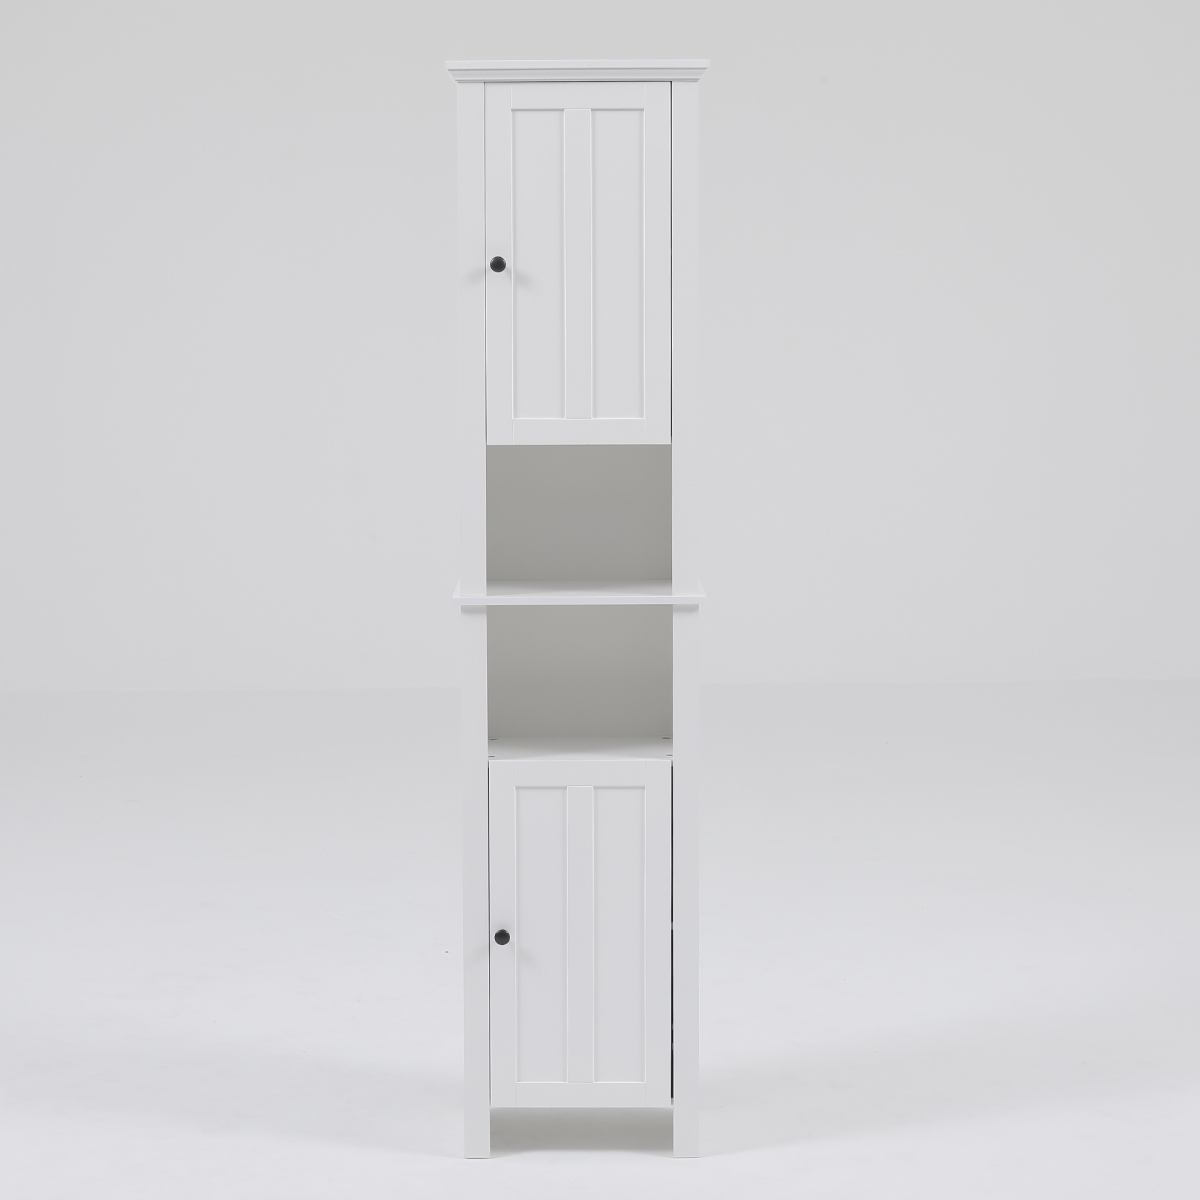 Luxen Home Whif387 11.8 X 28.3 In. White Wood Tall Bathroom 6 Shelves Cabinet